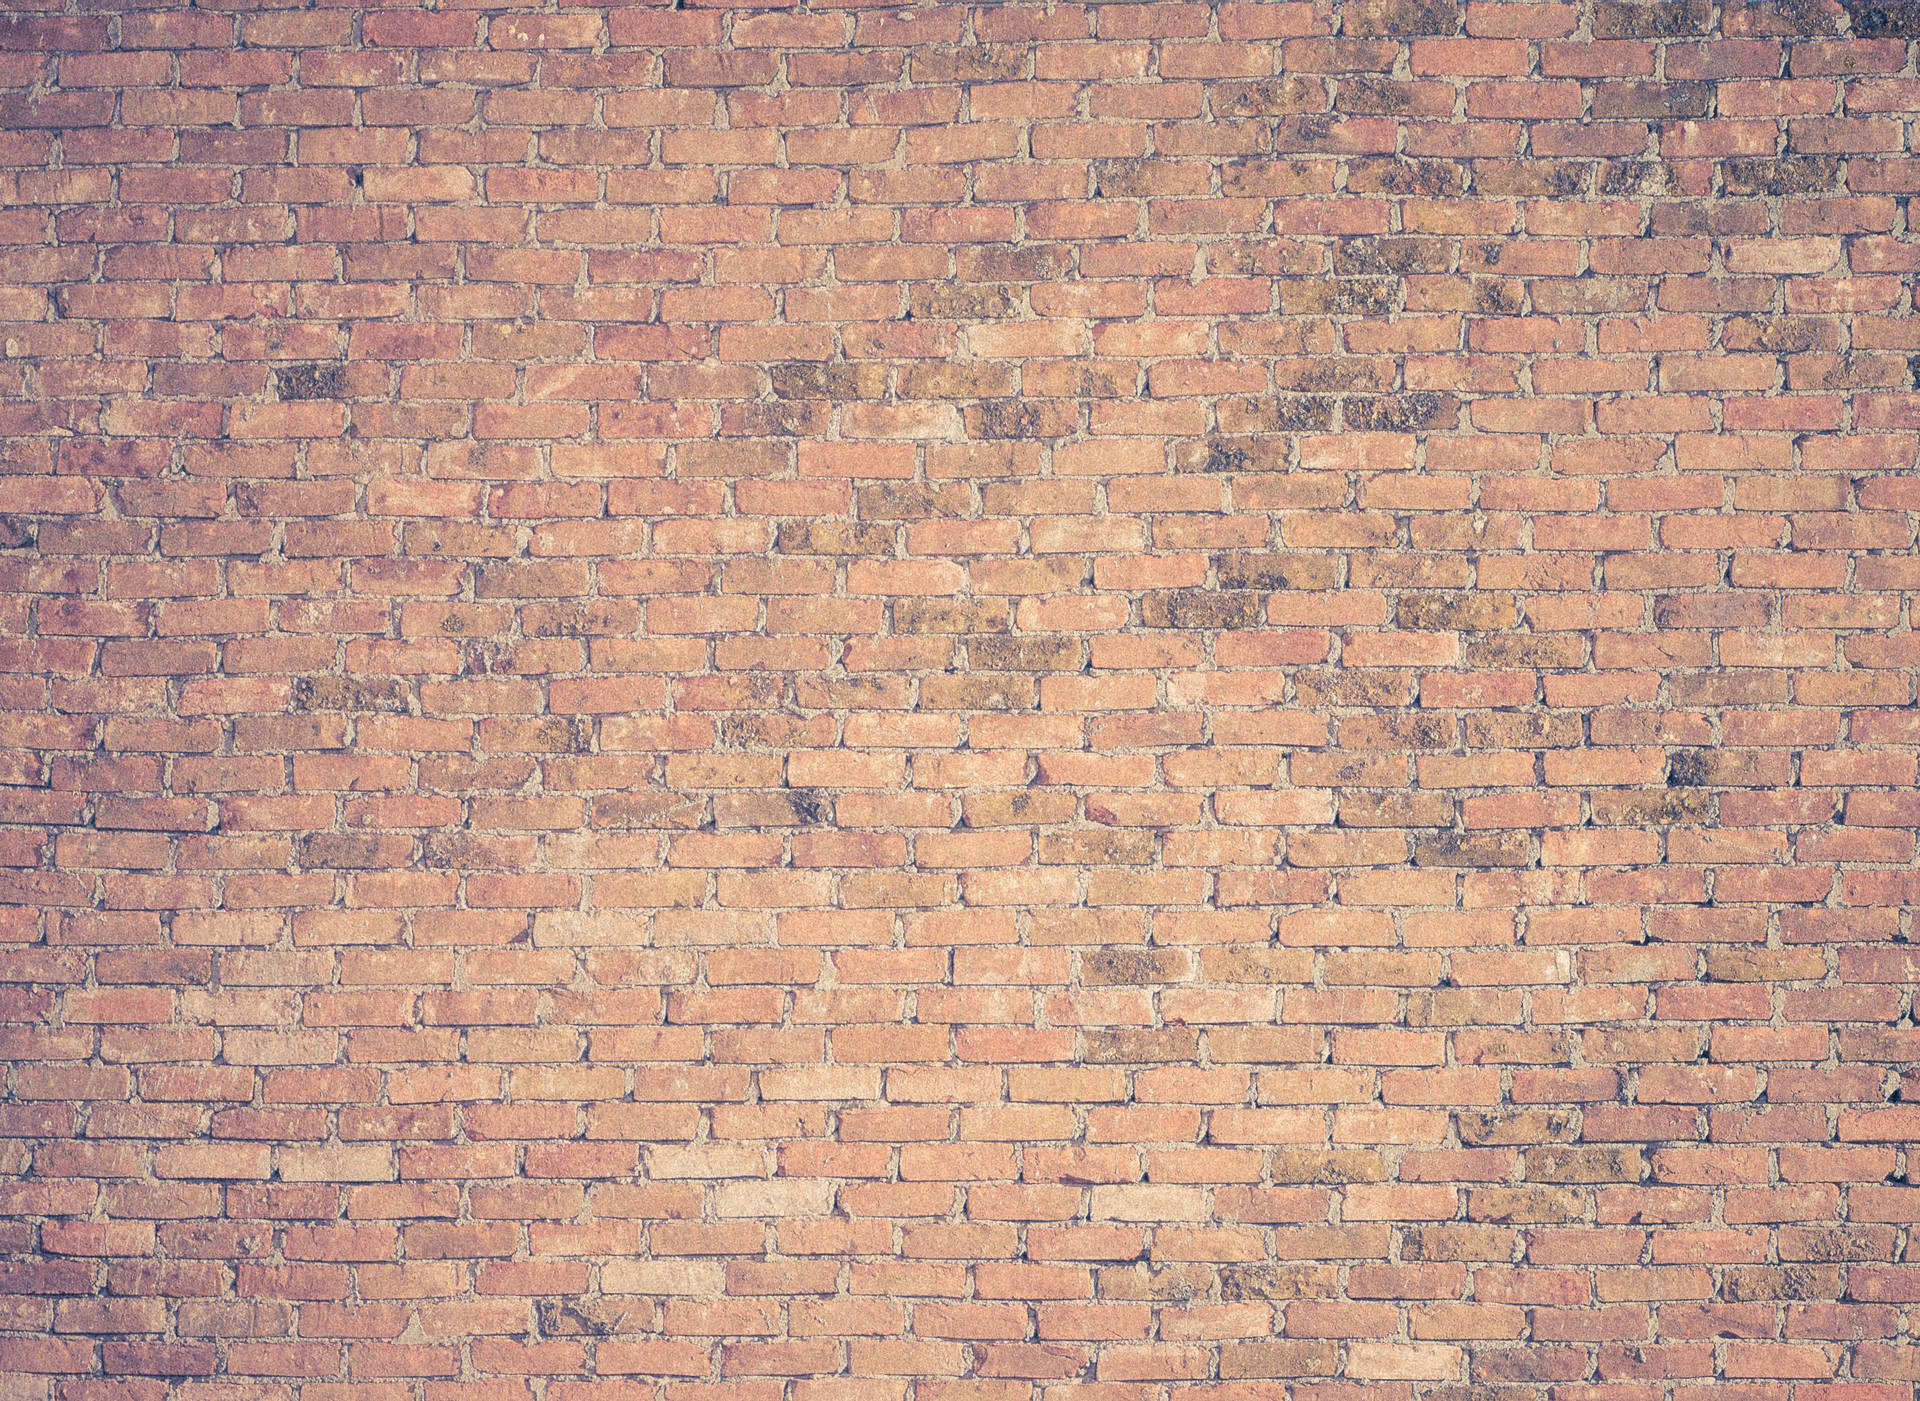 Brick 3239X2364 Wallpaper and Background Image